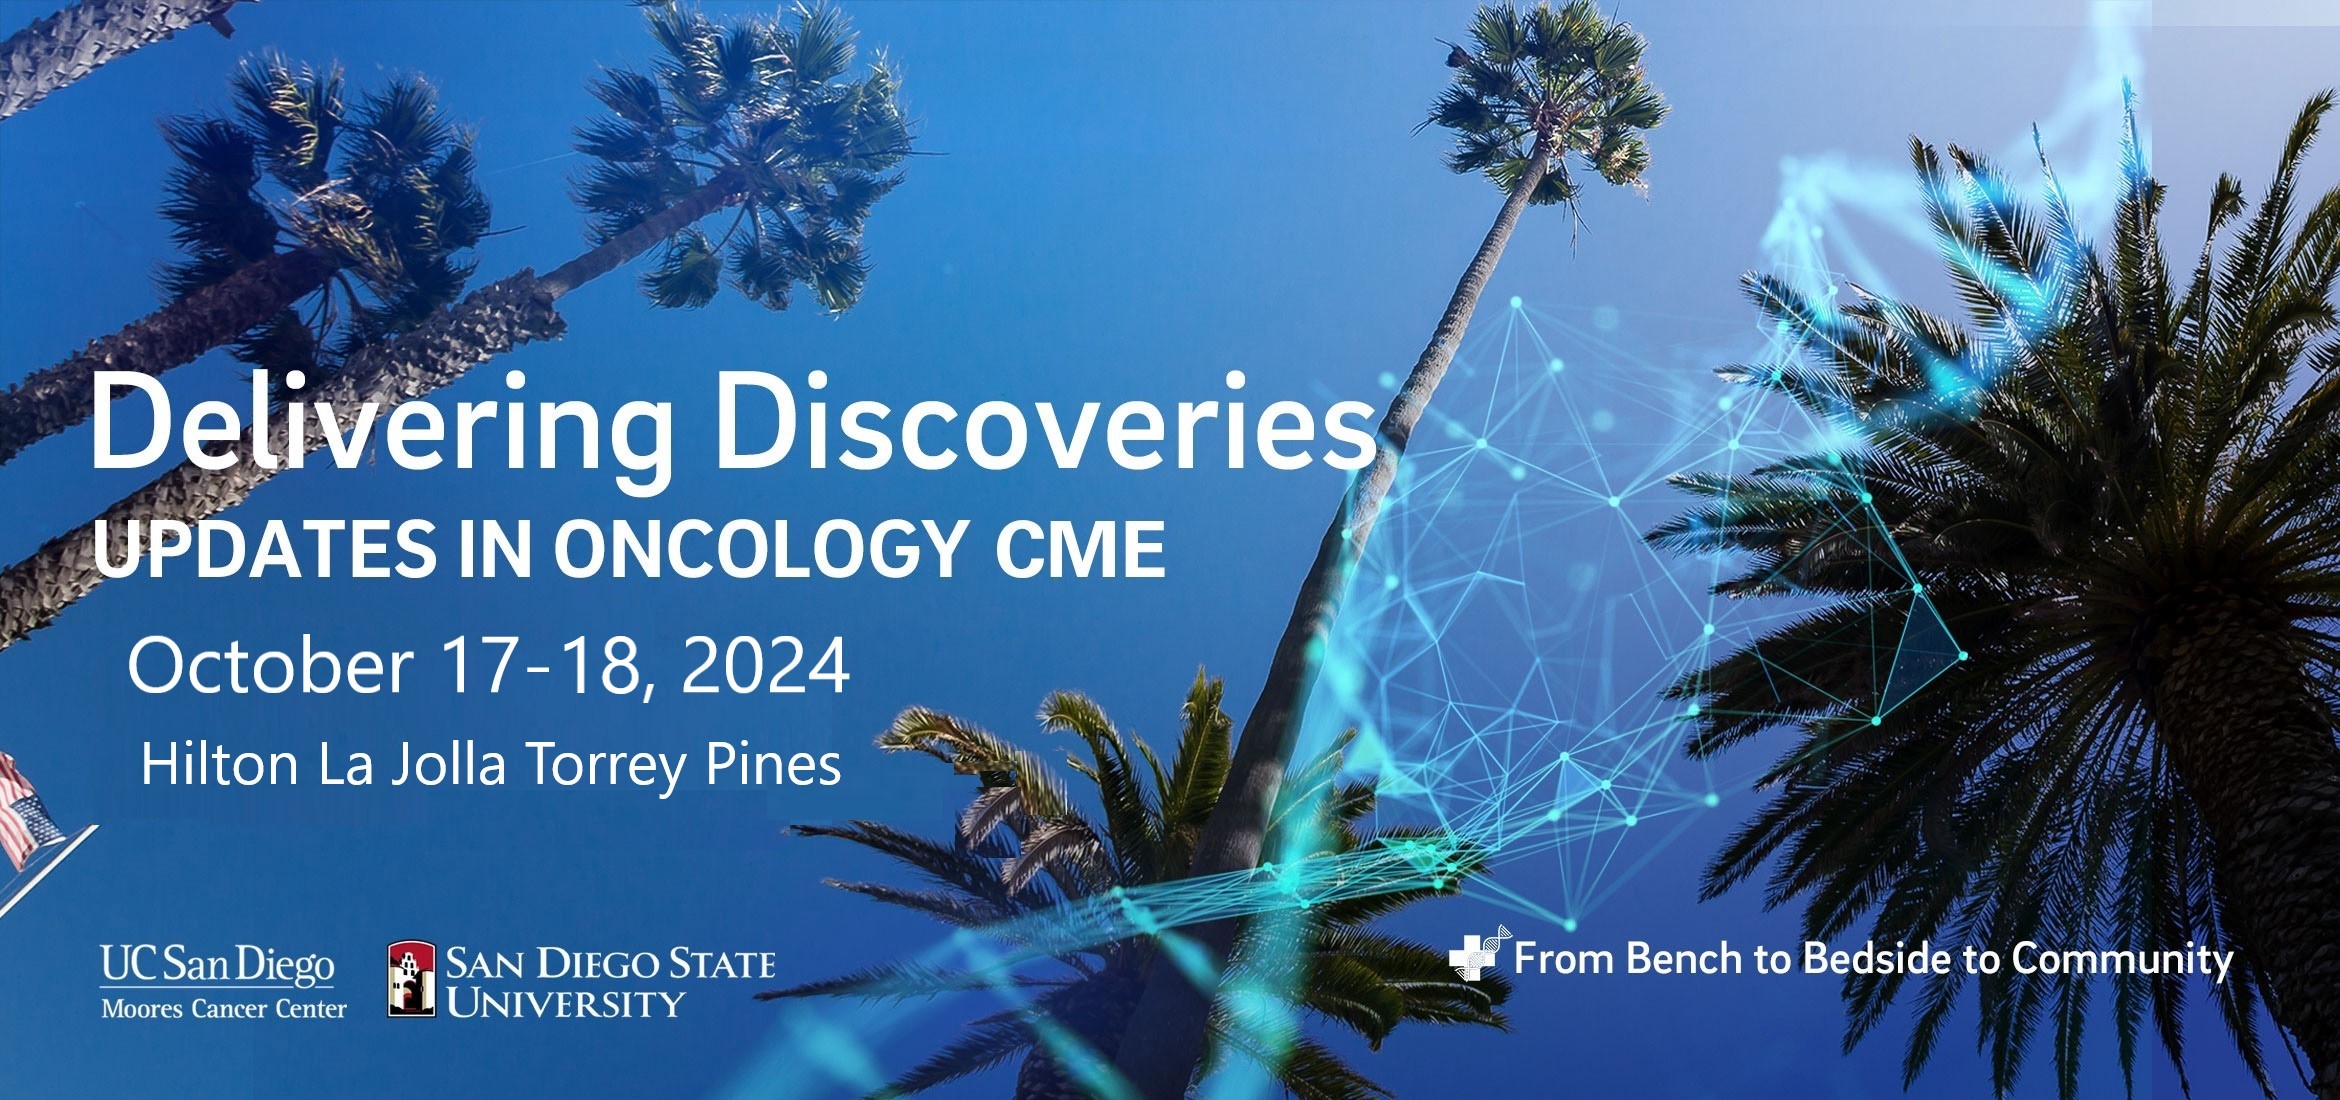 Delivering Discoveries: Updates in Oncology 2024 - SAVE THE DATE Banner